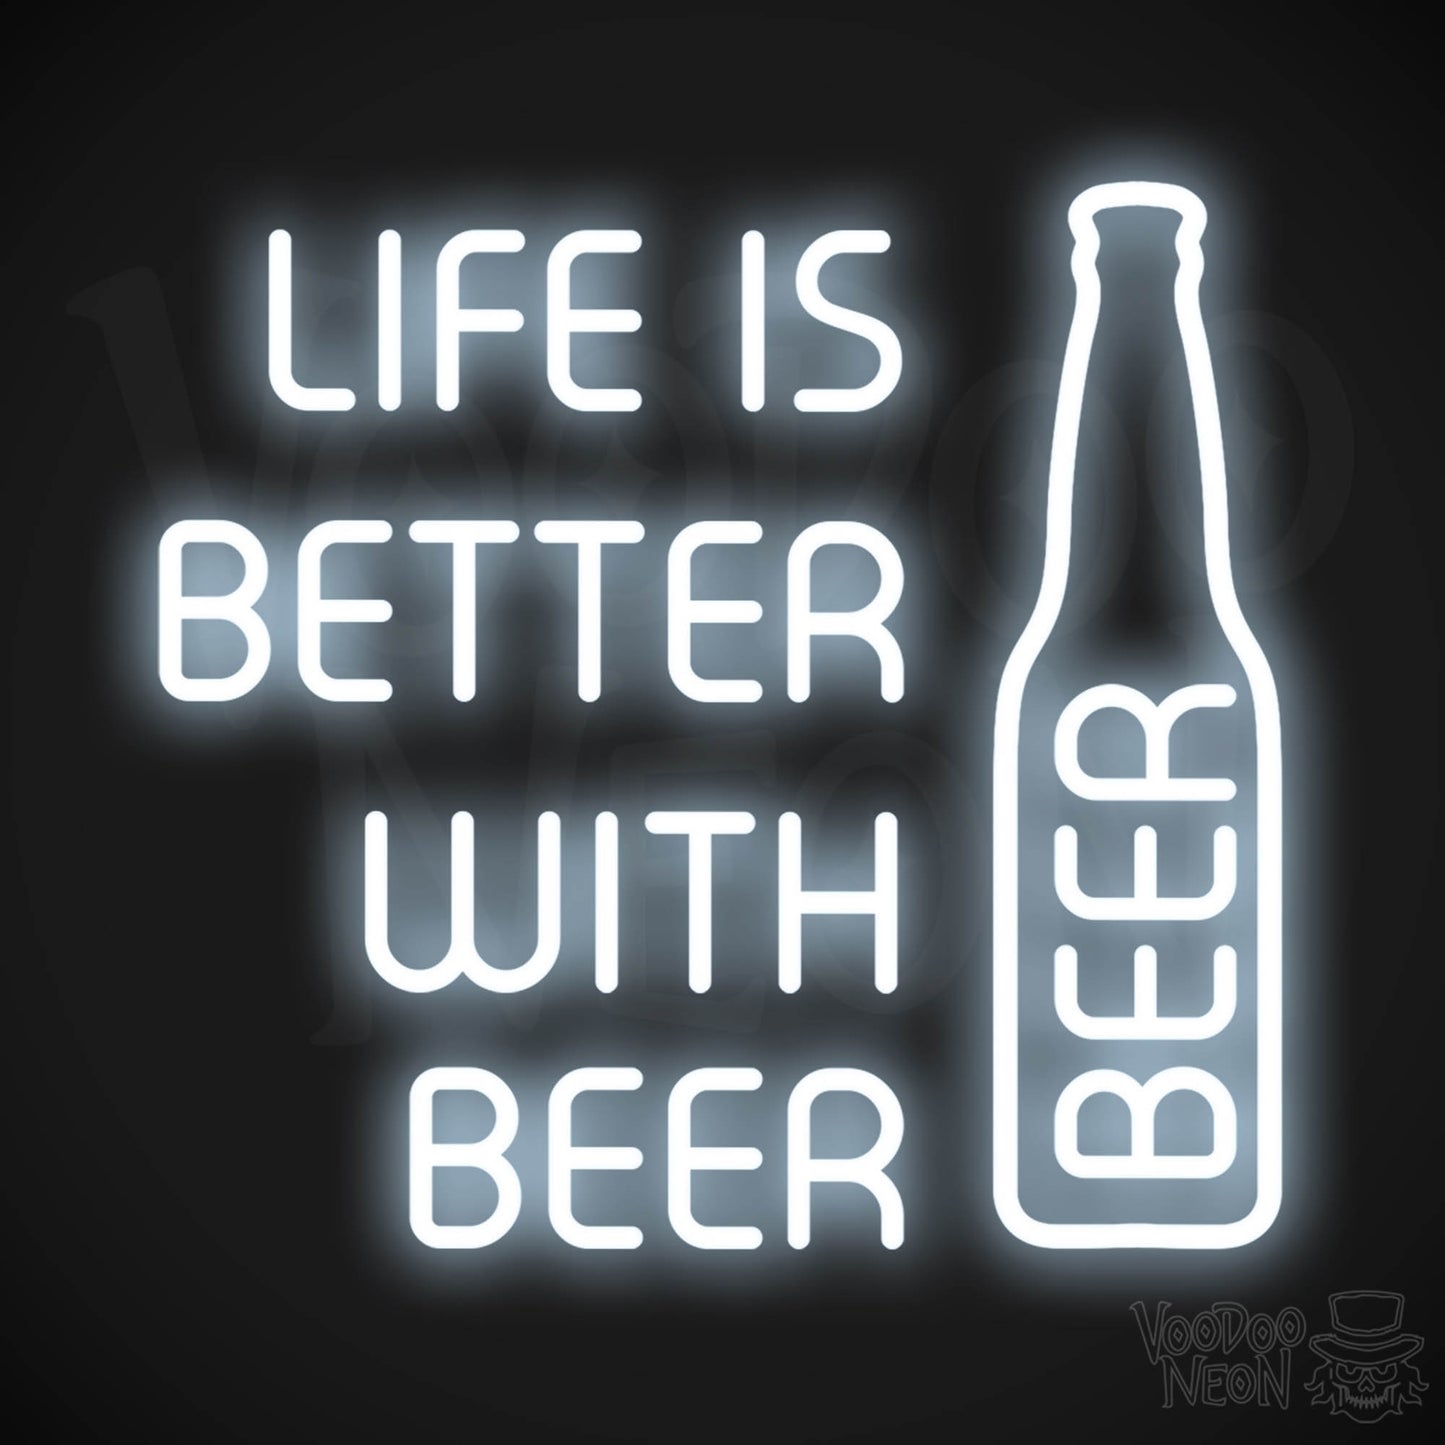 Life Is Better With Beer LED Neon - Cool White